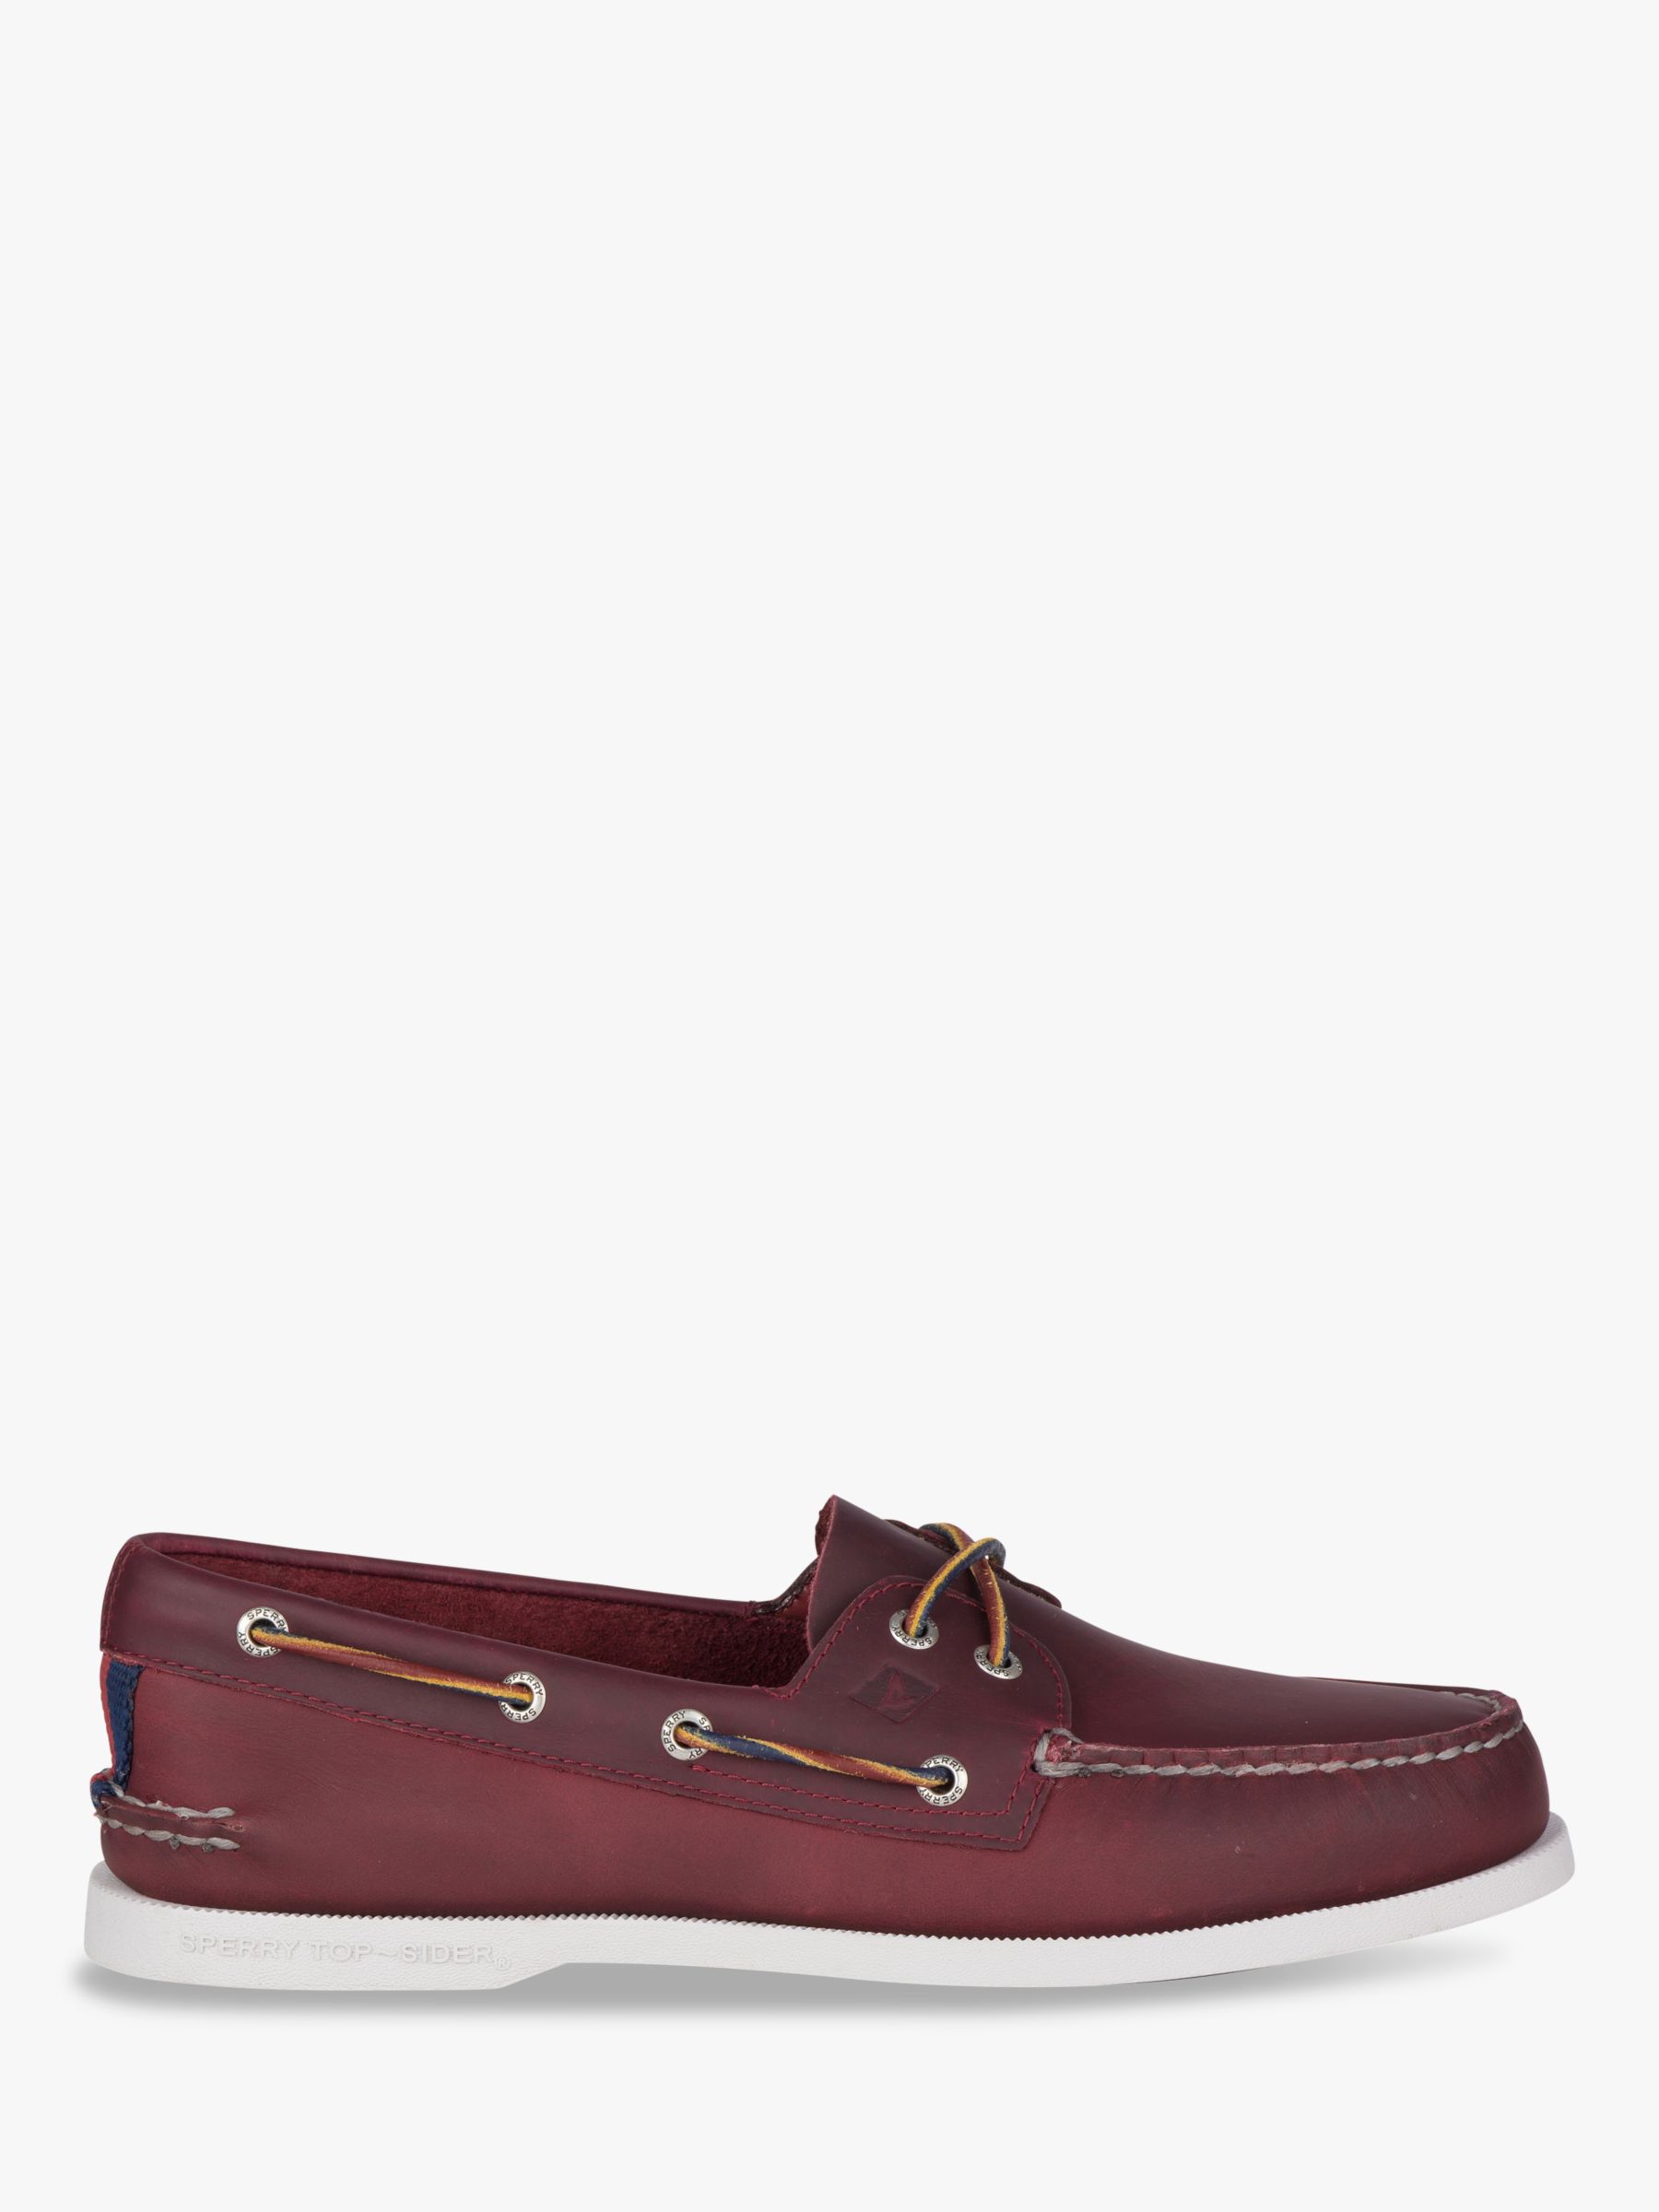 discounted sperry boat shoes